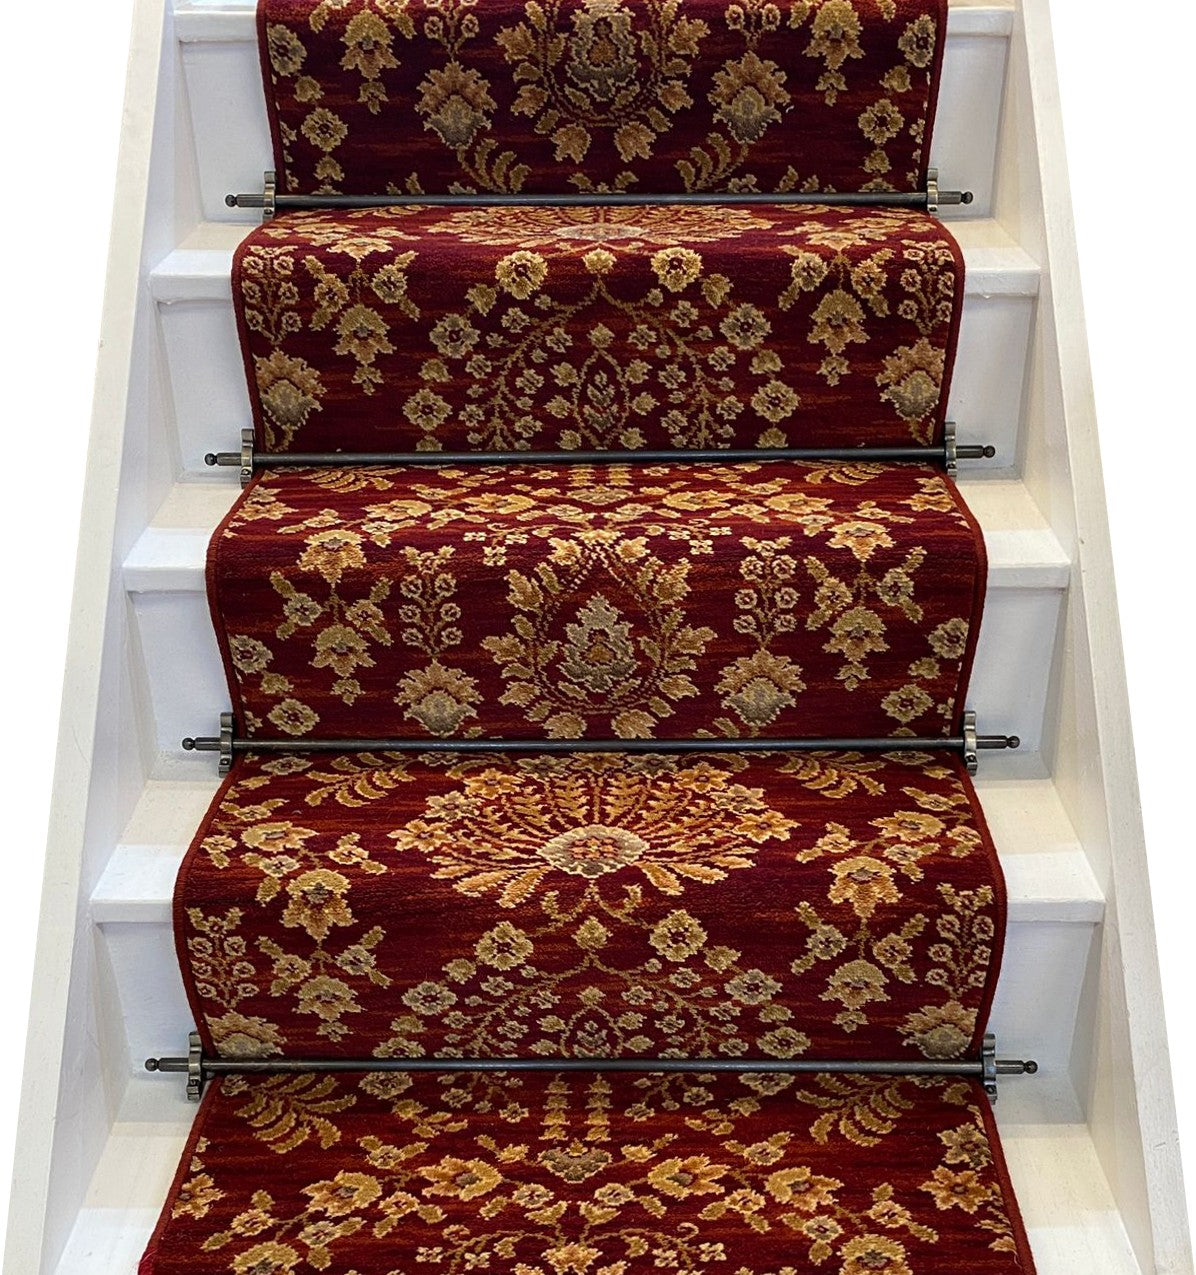 Ulster Carpets Glendun Red Sultan Stair Runner with choice of adding bespoke border or overlocking colour (per linear metre)